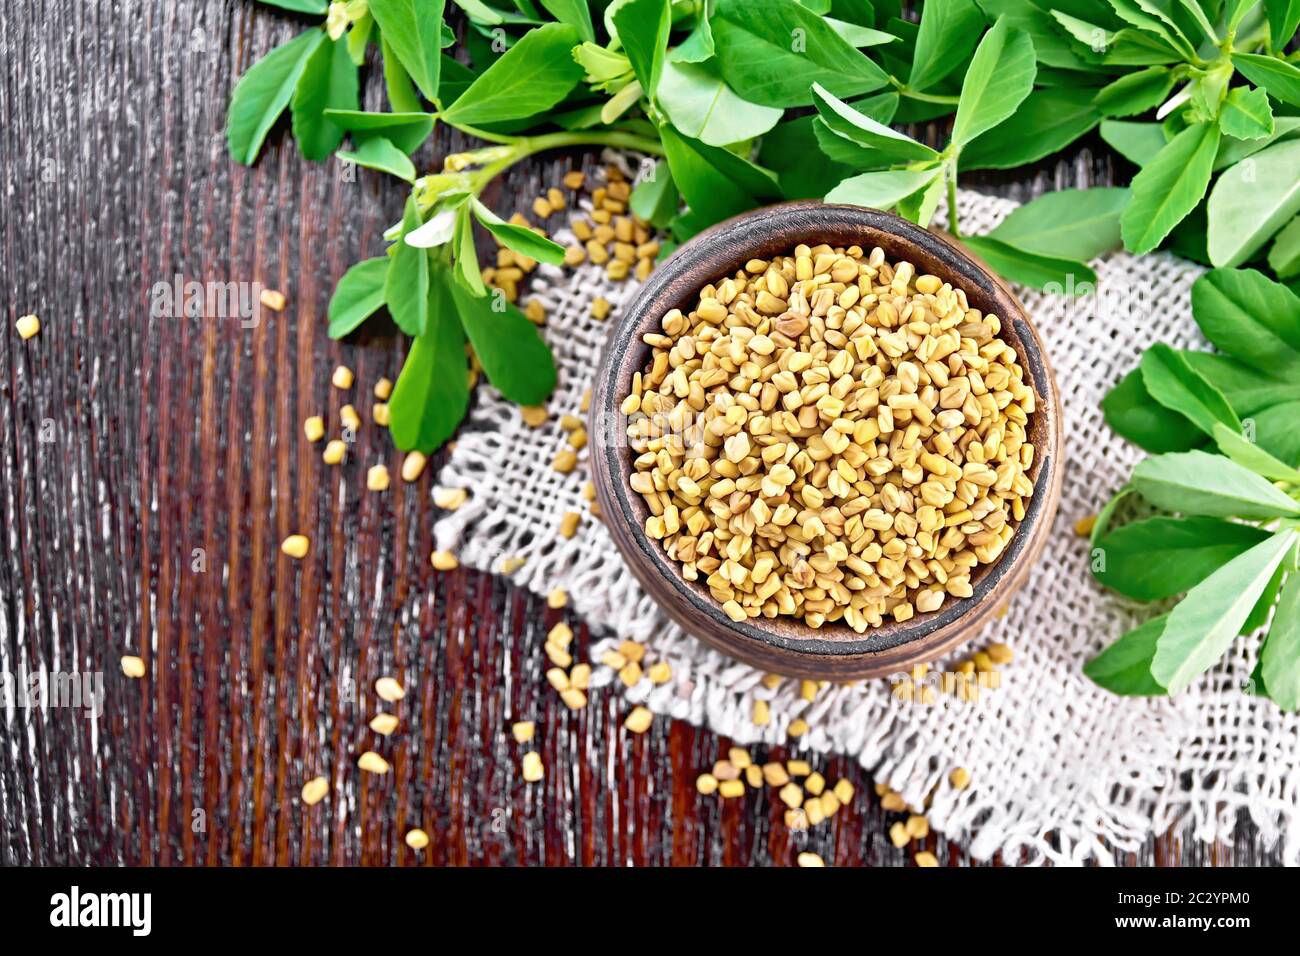 Fenugreek seeds in a bowl on burlap with green leaves on a wooden board background from above Stock Photo